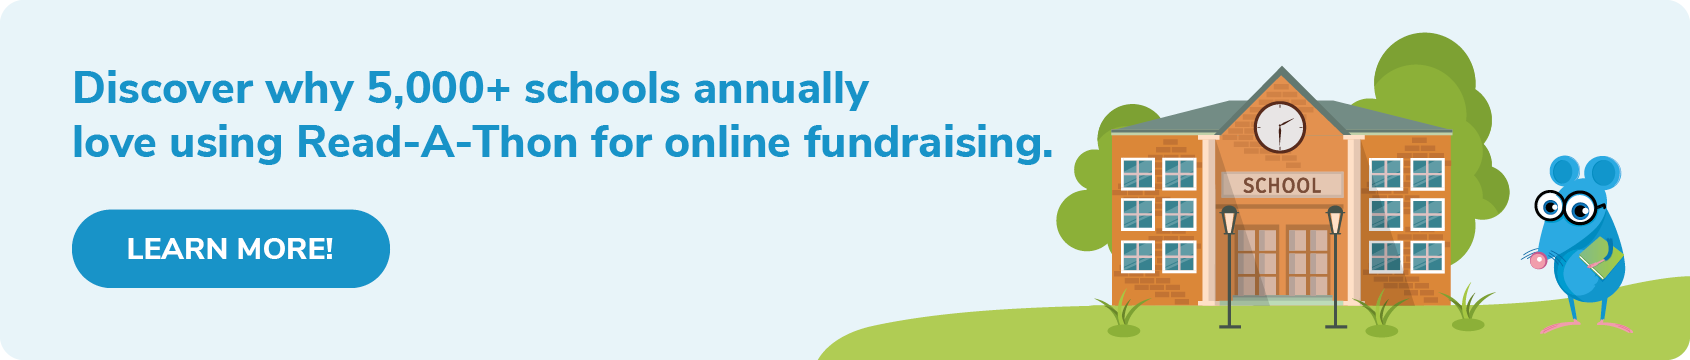 Download our free brochure to learn why 5,000+ schools love using Read-A-Thon for online school fundraising.